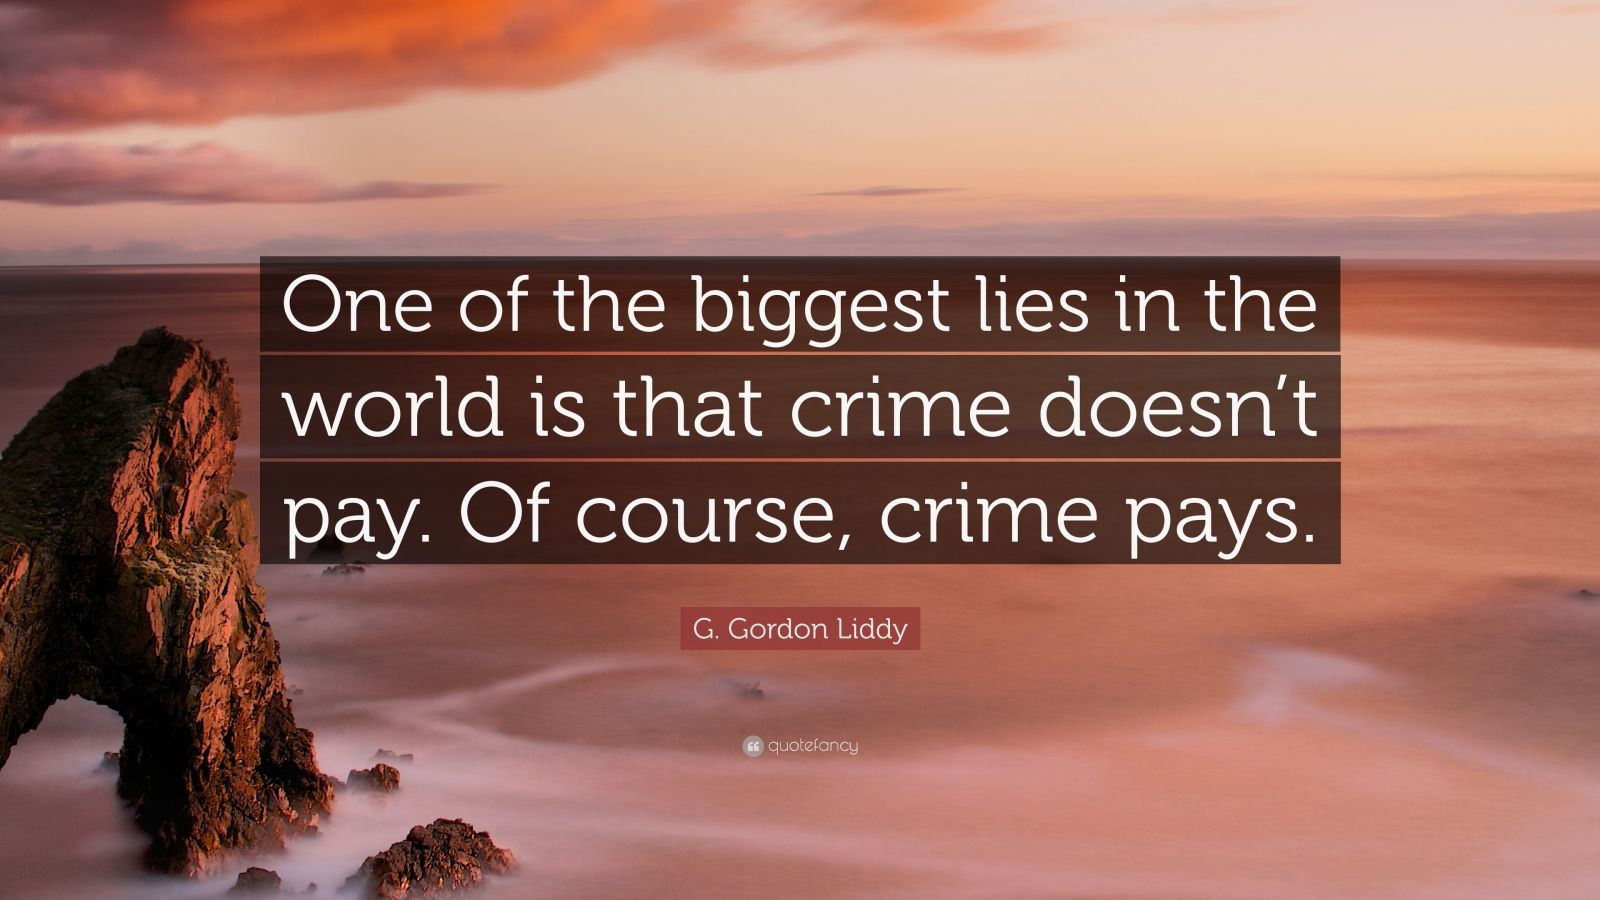 G. Gordon Liddy Quote: “One of the biggest lies in the world is that